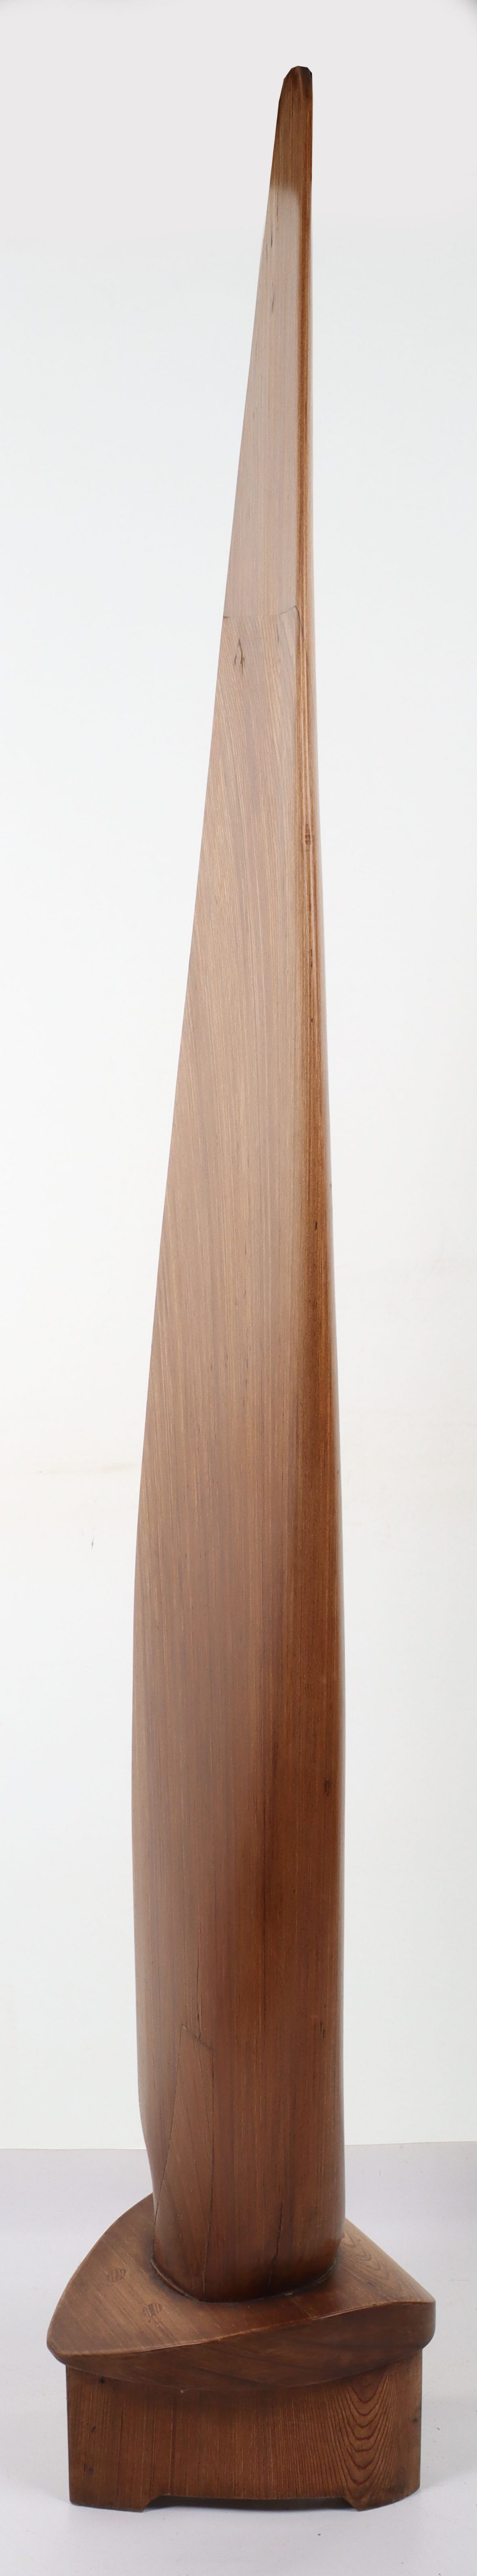 Wooden Aircraft Propeller Blade - Image 6 of 9